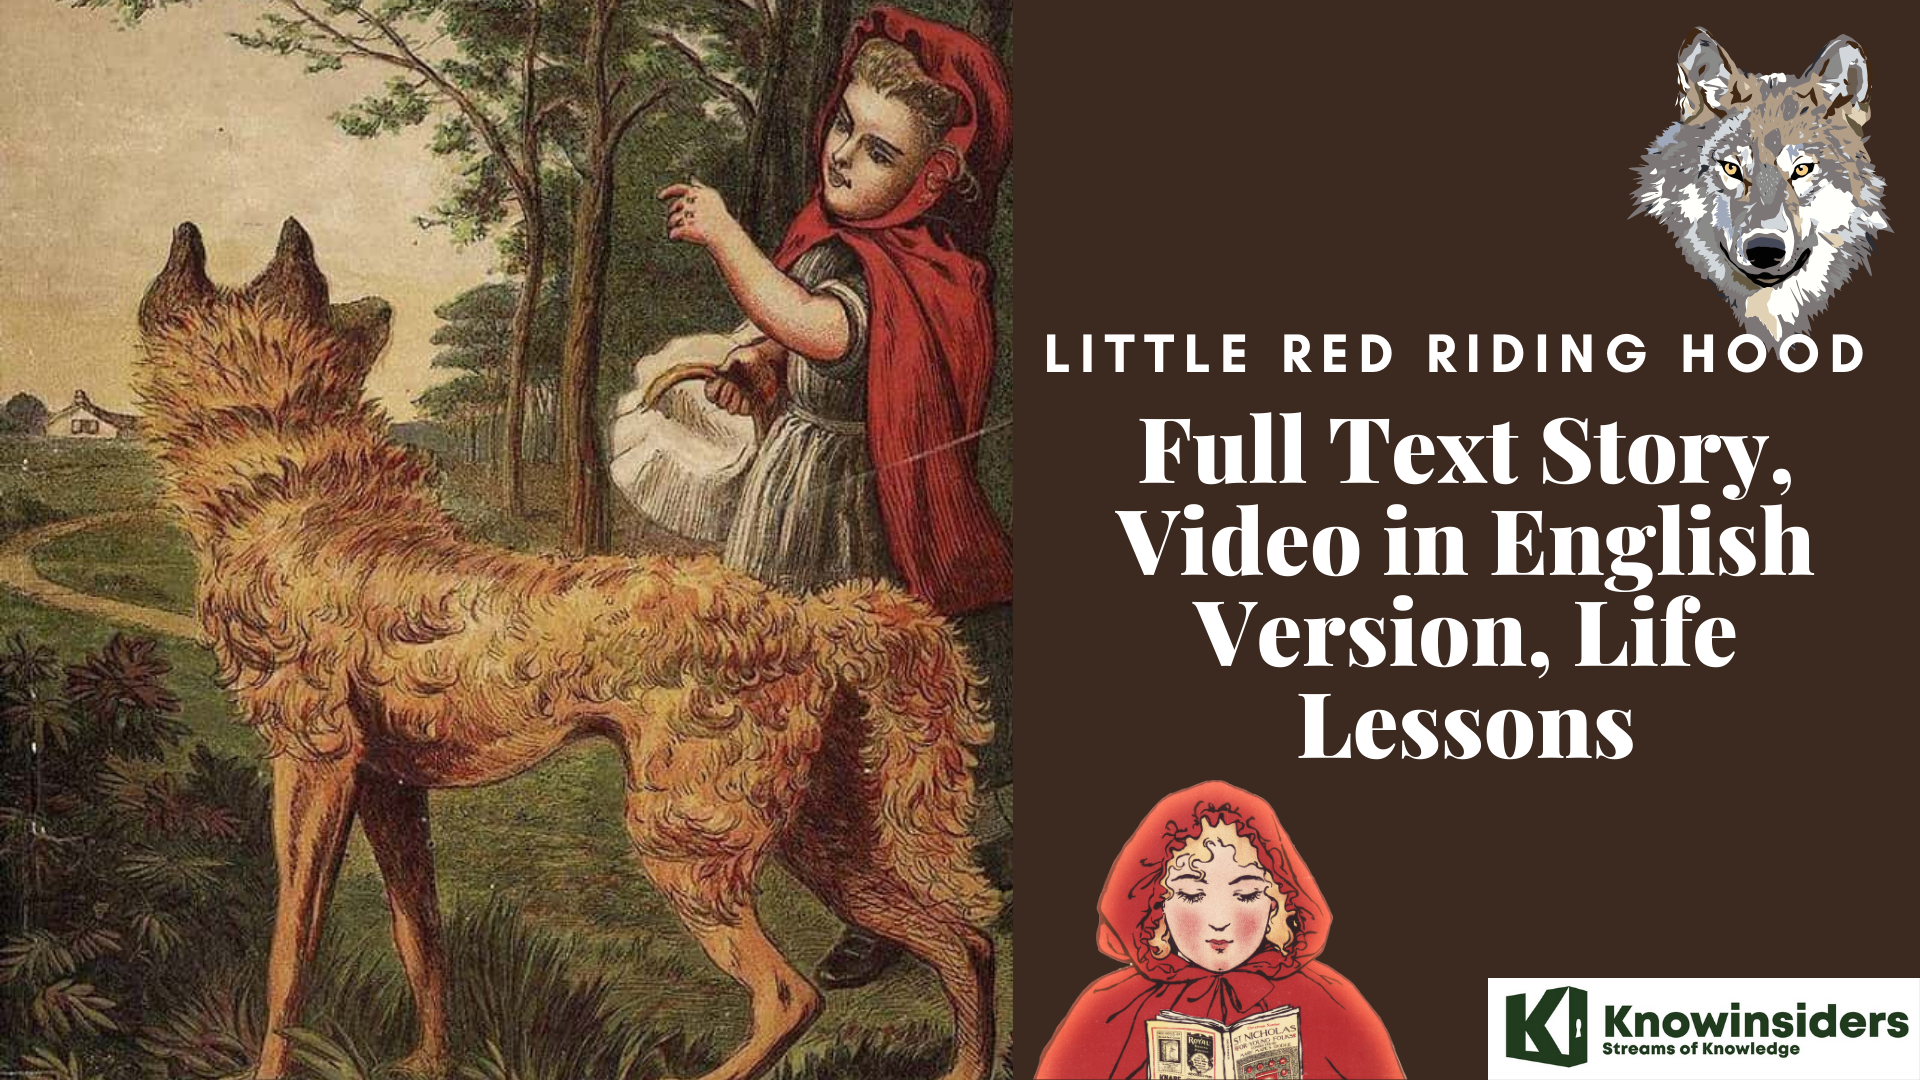 Little Red Riding Hood FairyTale: Full Text Story, Video in English Version, Life Lessons